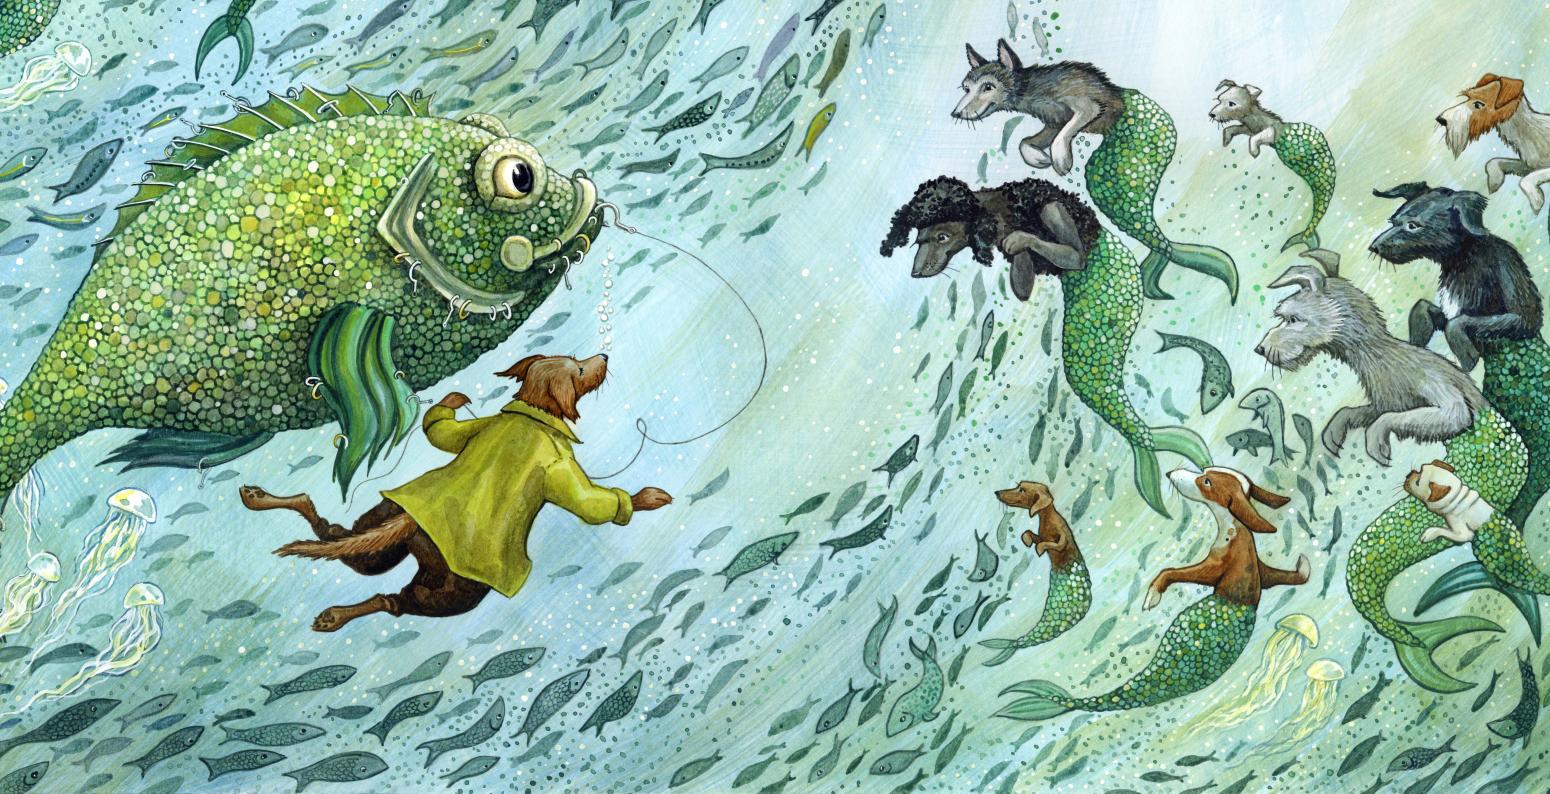 A dog in a yellow raincoat and a large fish hooked on a fishing line are underwater looking at a group of merpups.